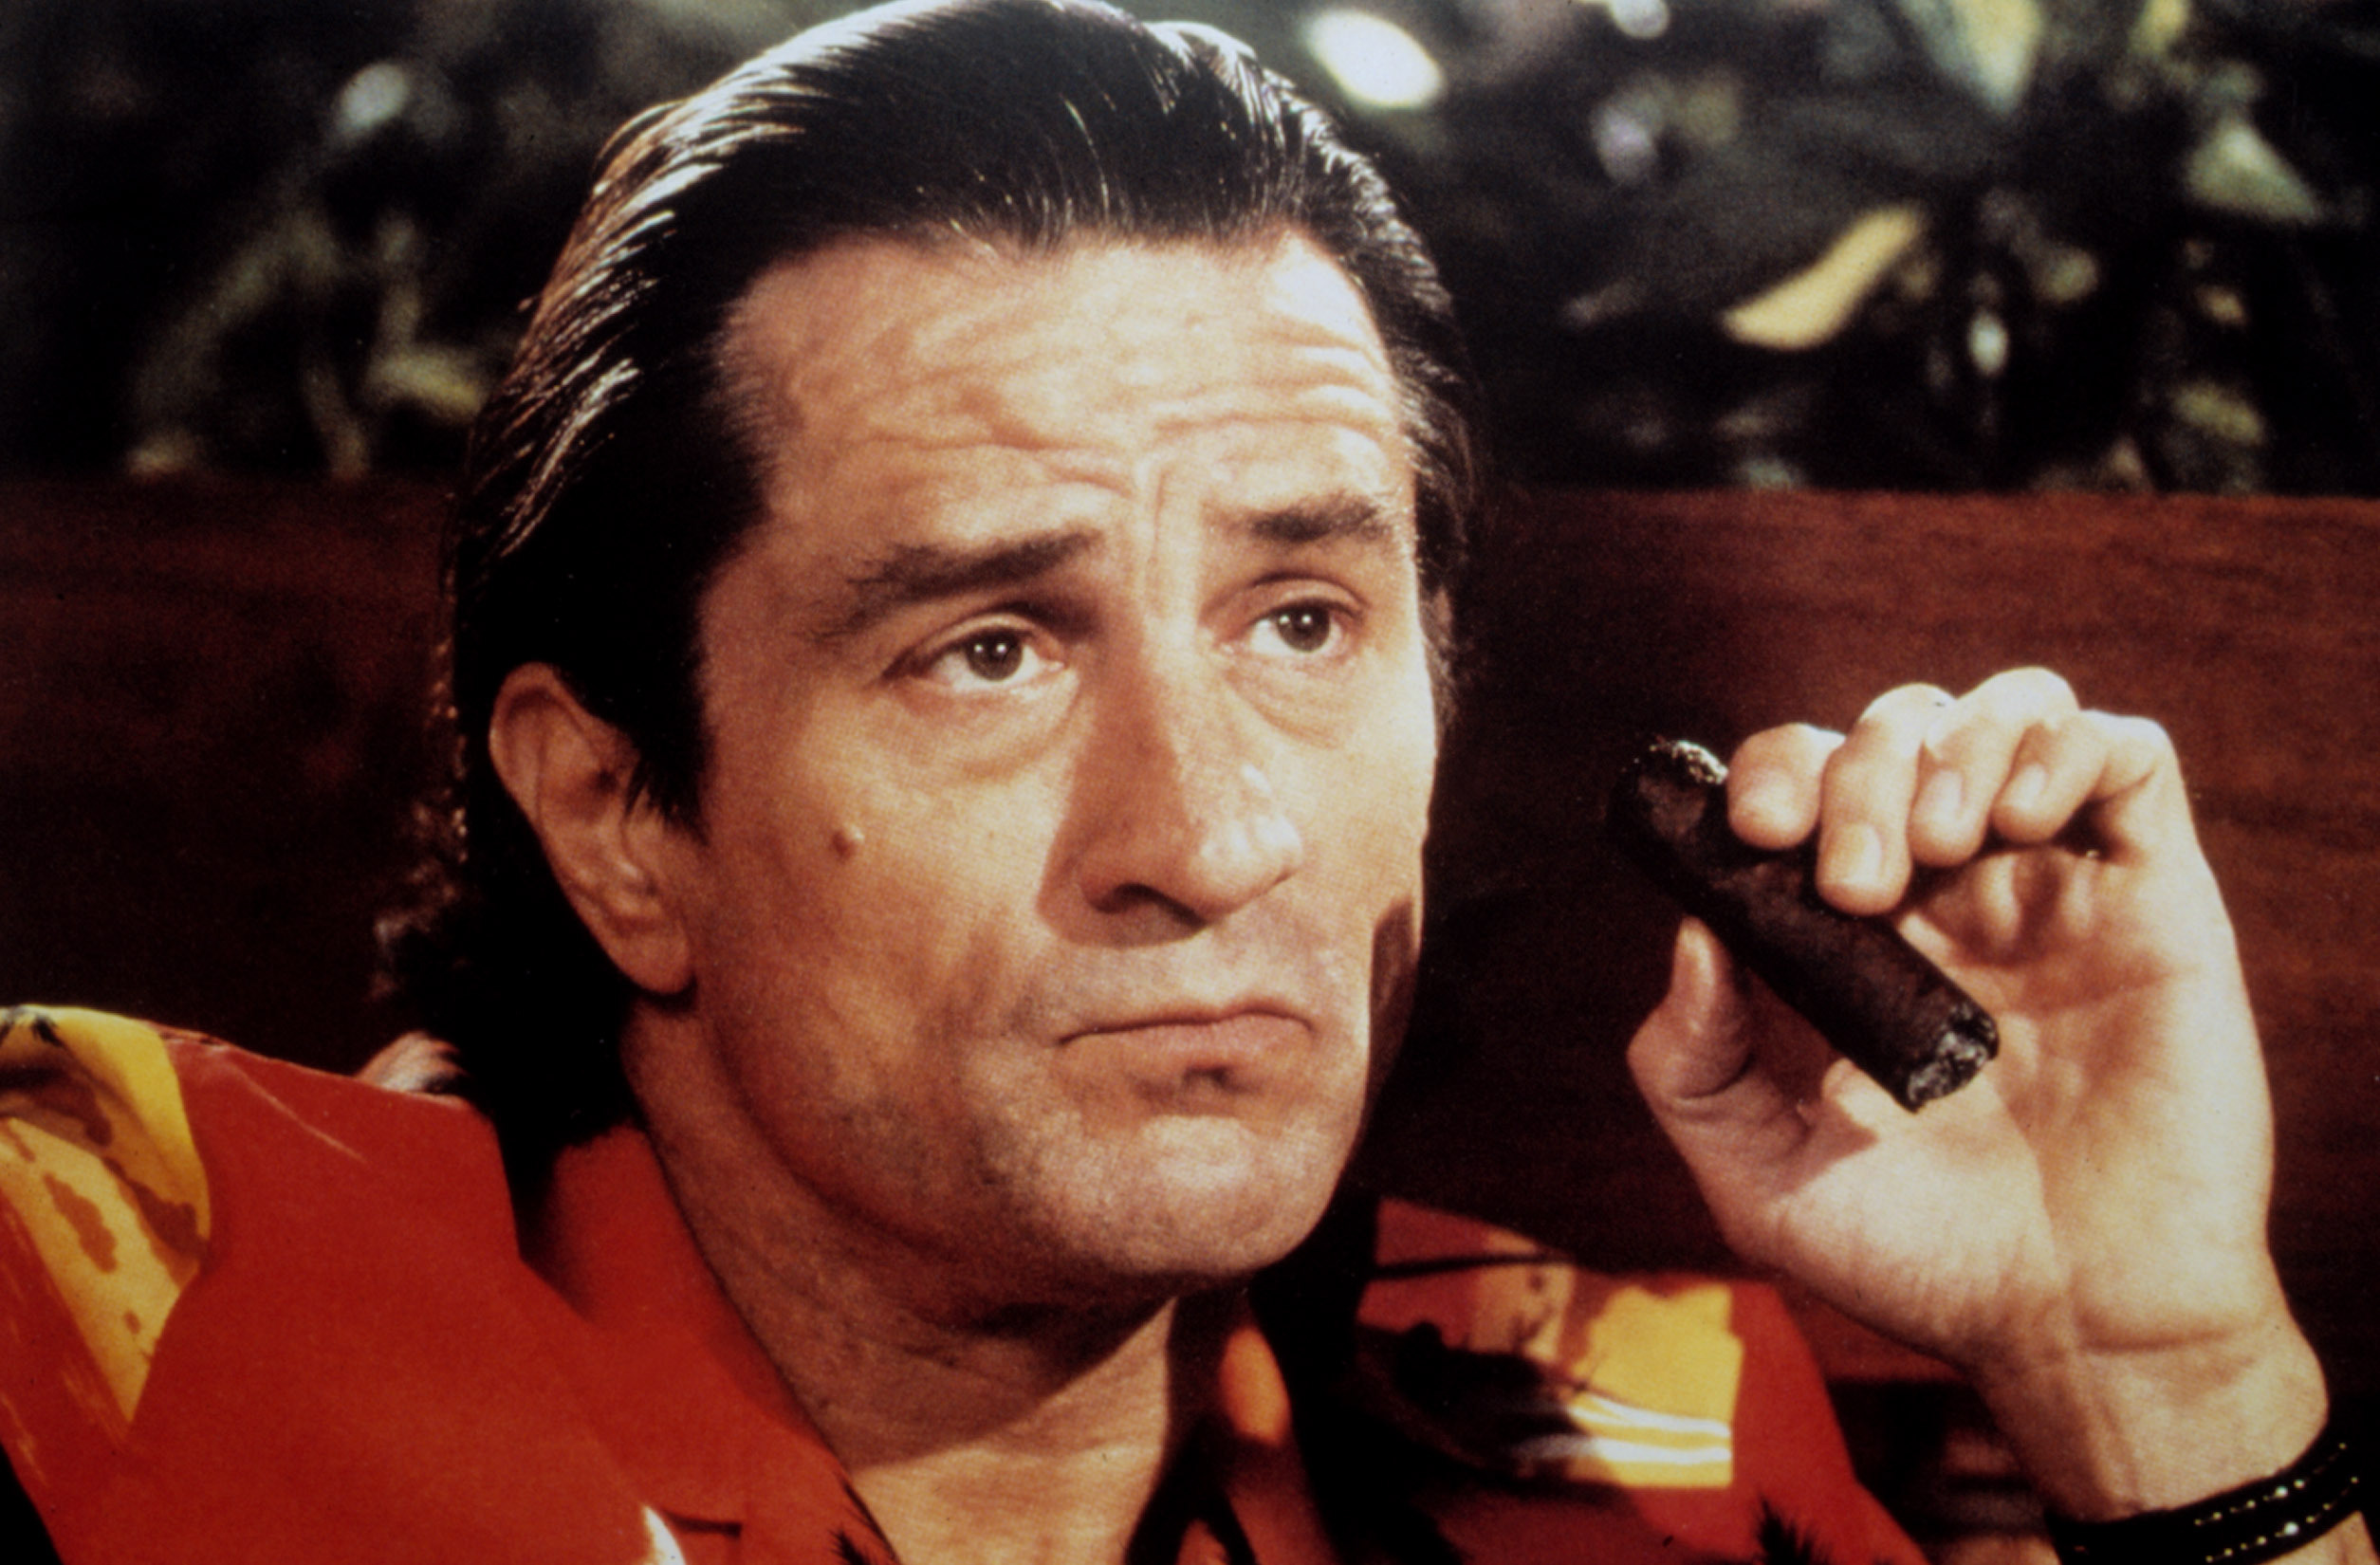 Martin Scorsese and Steven Spielberg Are Exec Producing a ‘Cape Fear’ Series